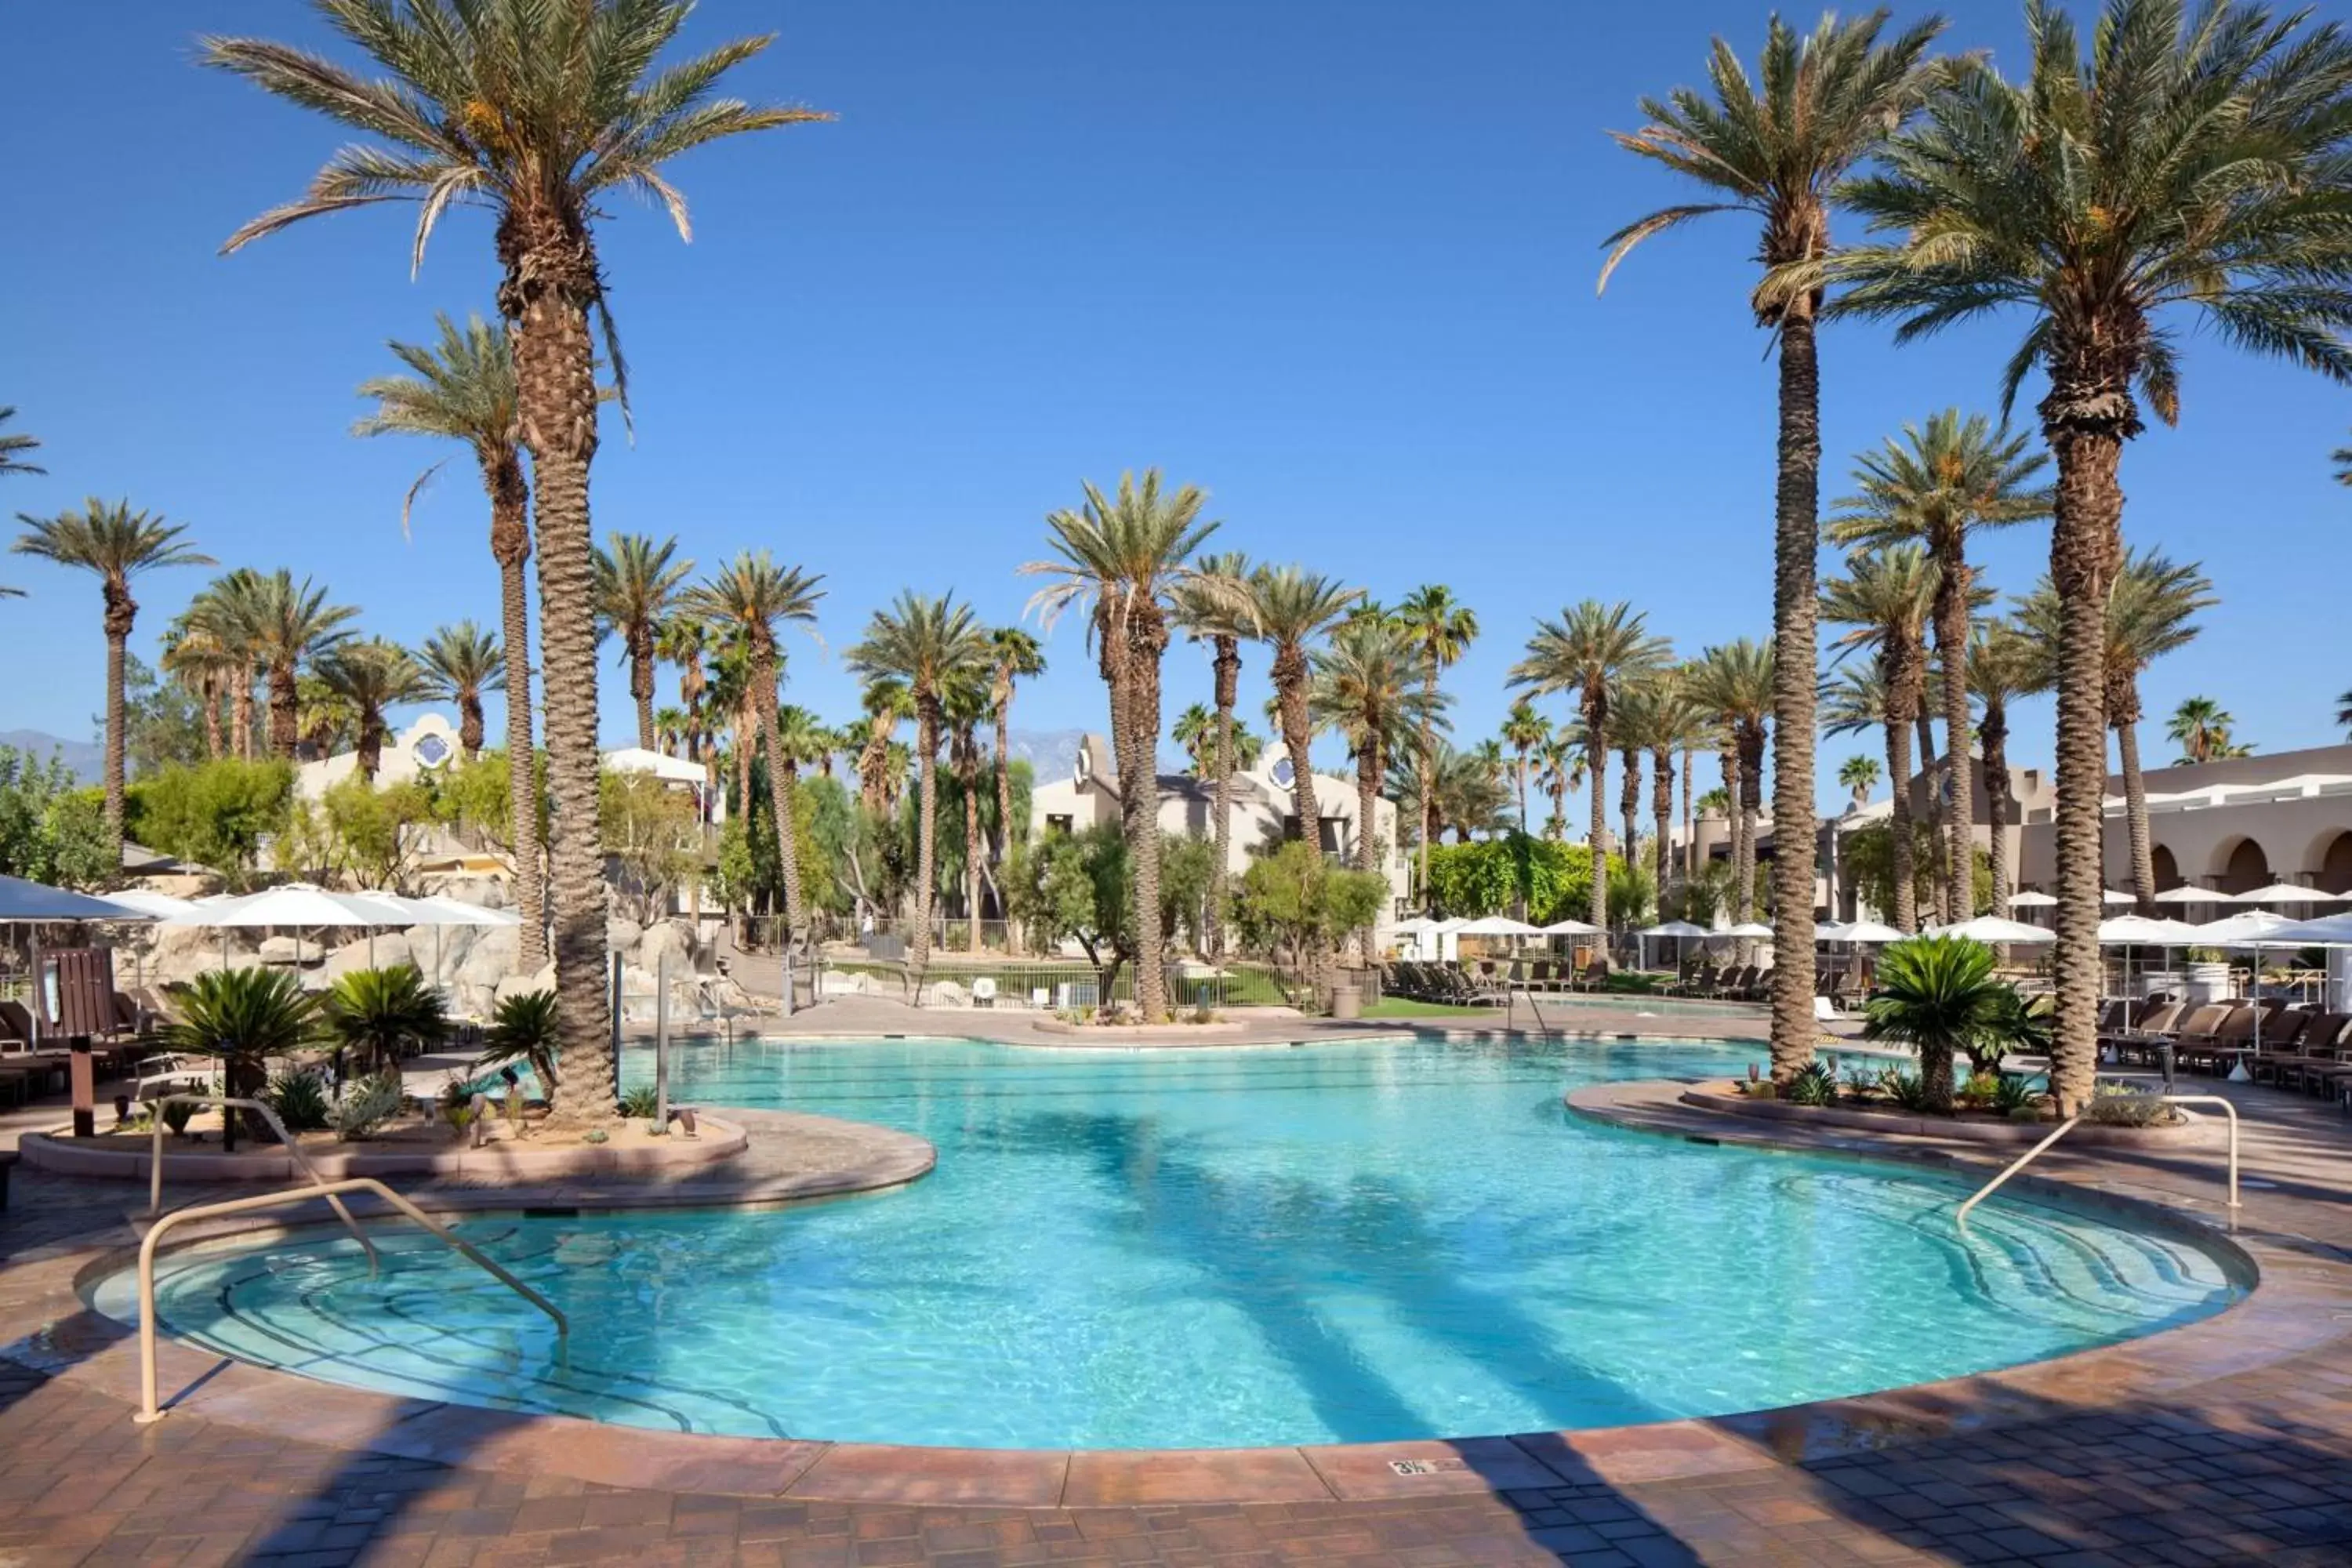 Swimming Pool in The Westin Mission Hills Resort Villas, Palm Springs